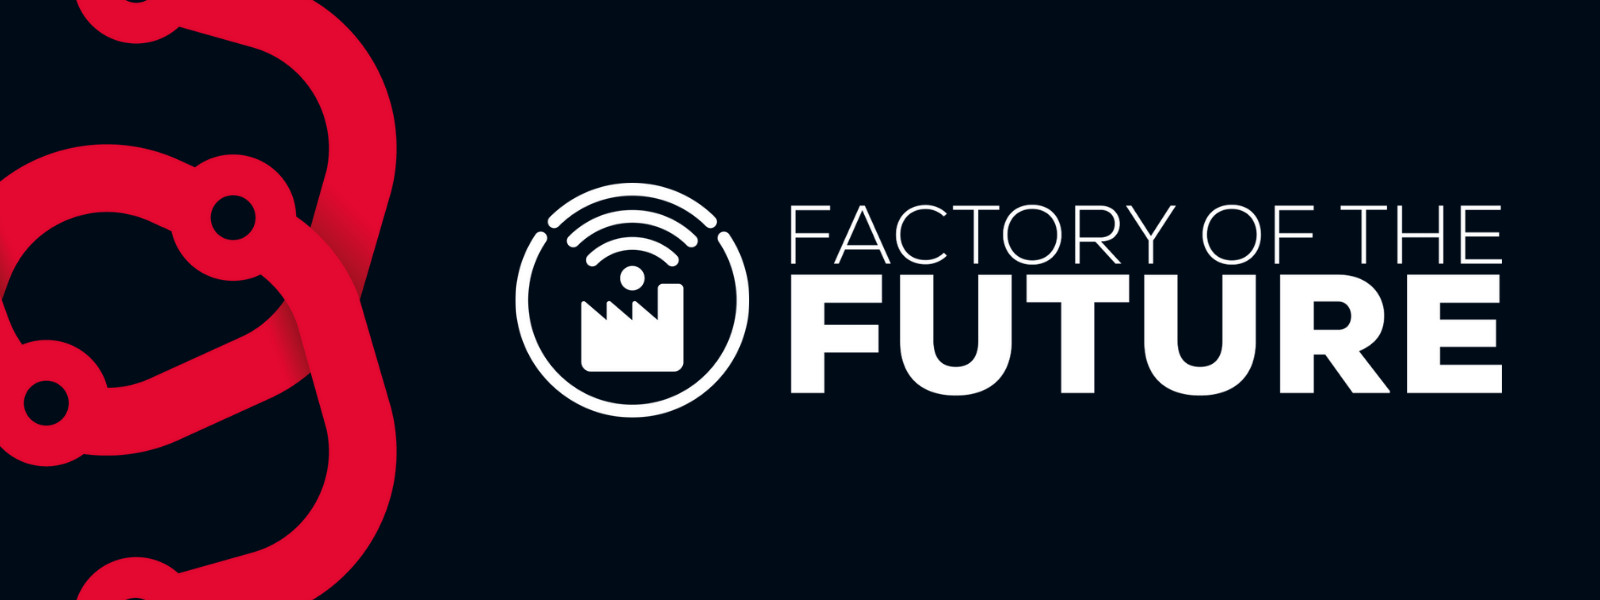 Factory of the Future - Black Country Innovative Manufacturing Organisation (BCIMO) SME Event